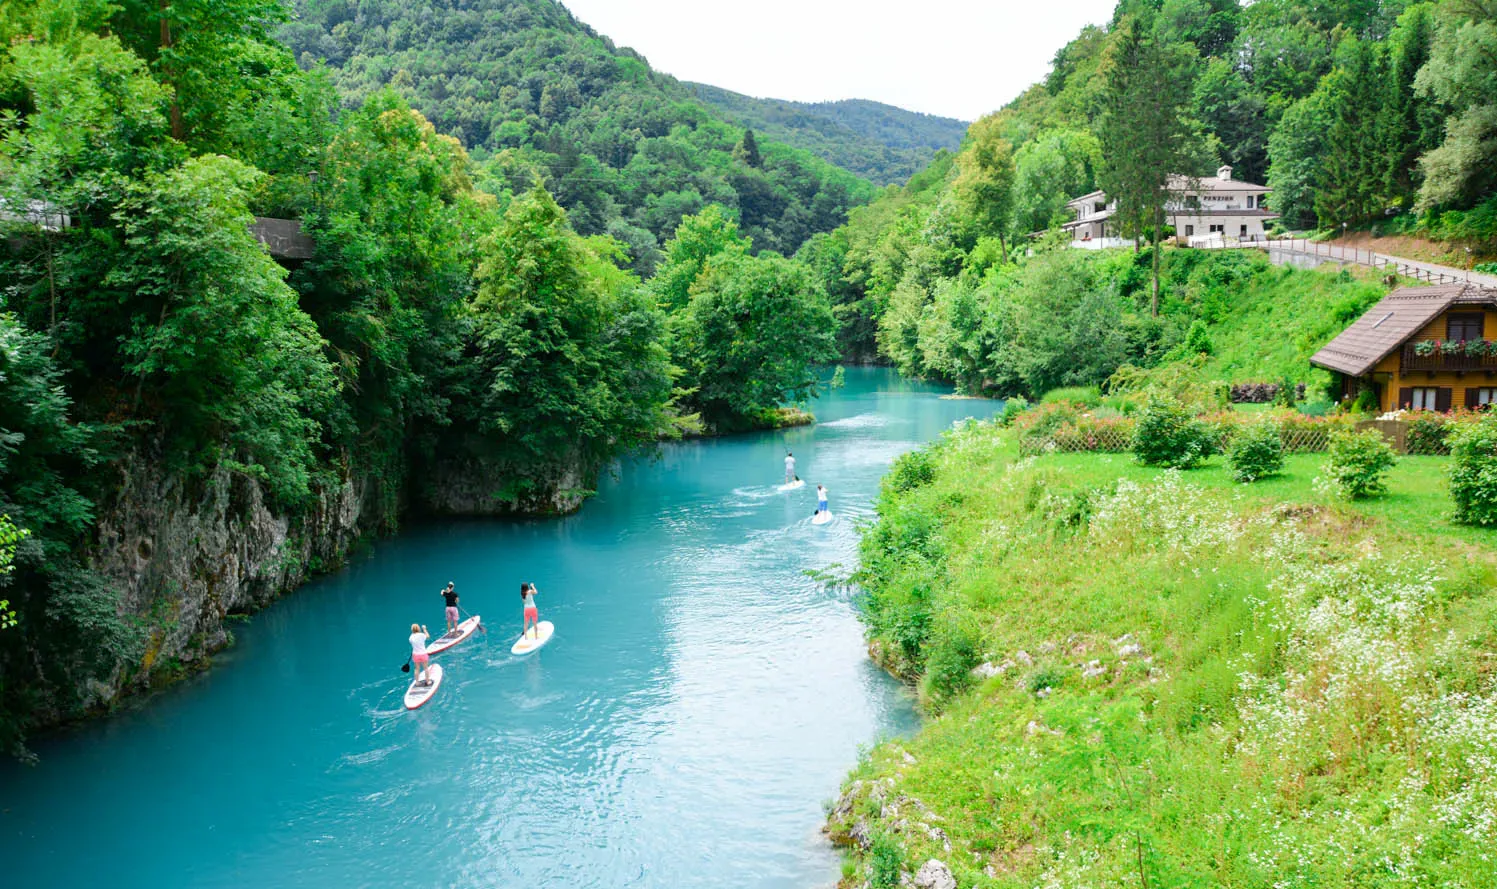 Stand up paddleboarders in Slovenia